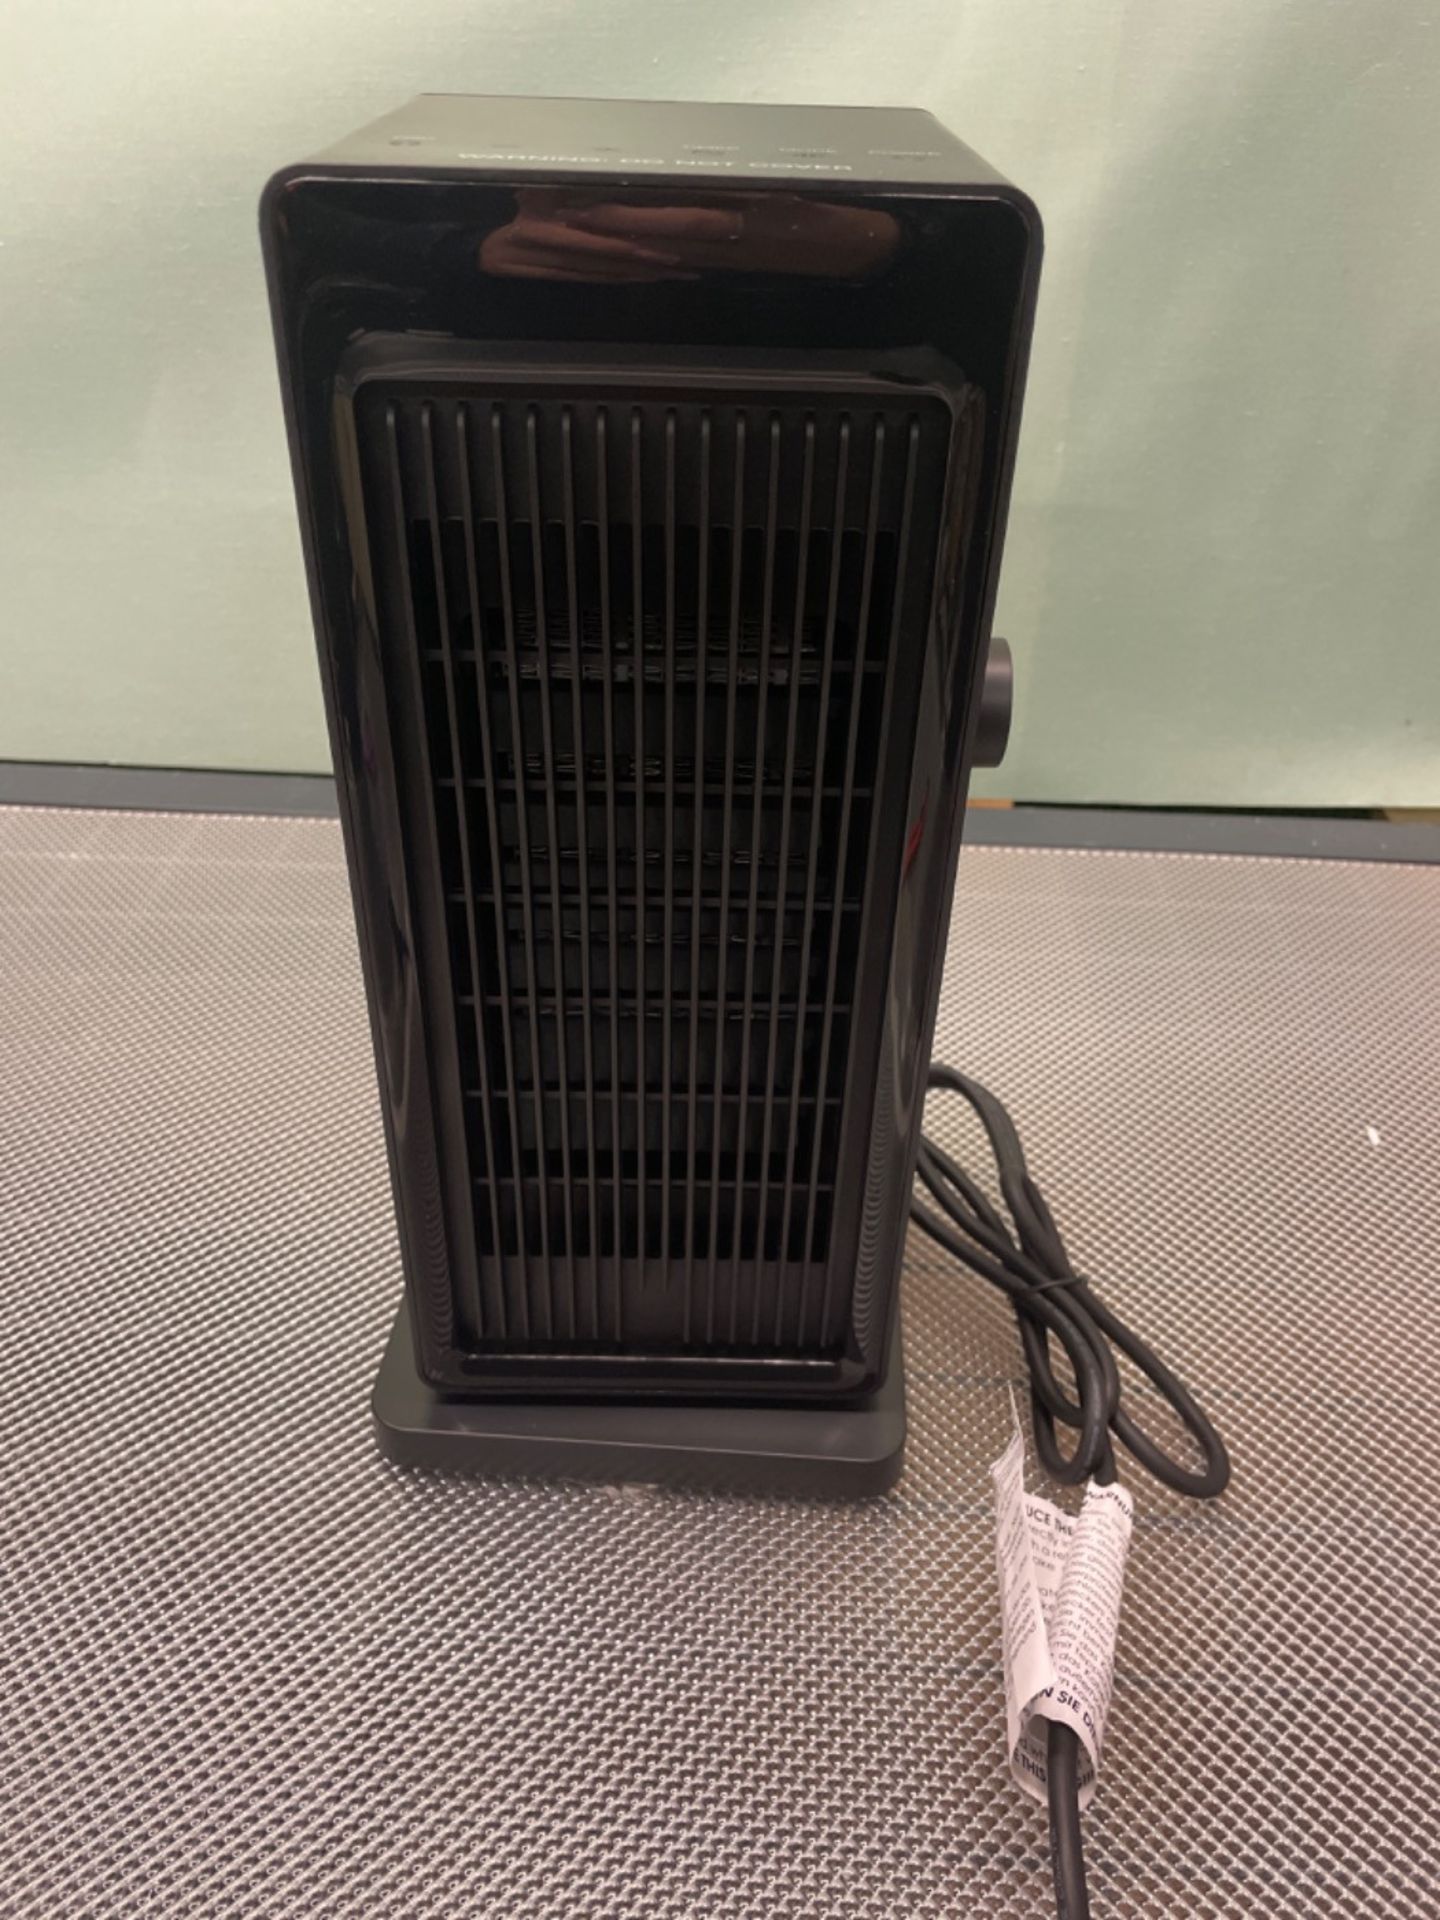 OMISOON Heater, ECO Electric Heater, 90°Oscillation, 24H Timer, Thermostat, Low Energy, Remote Con - Image 2 of 3